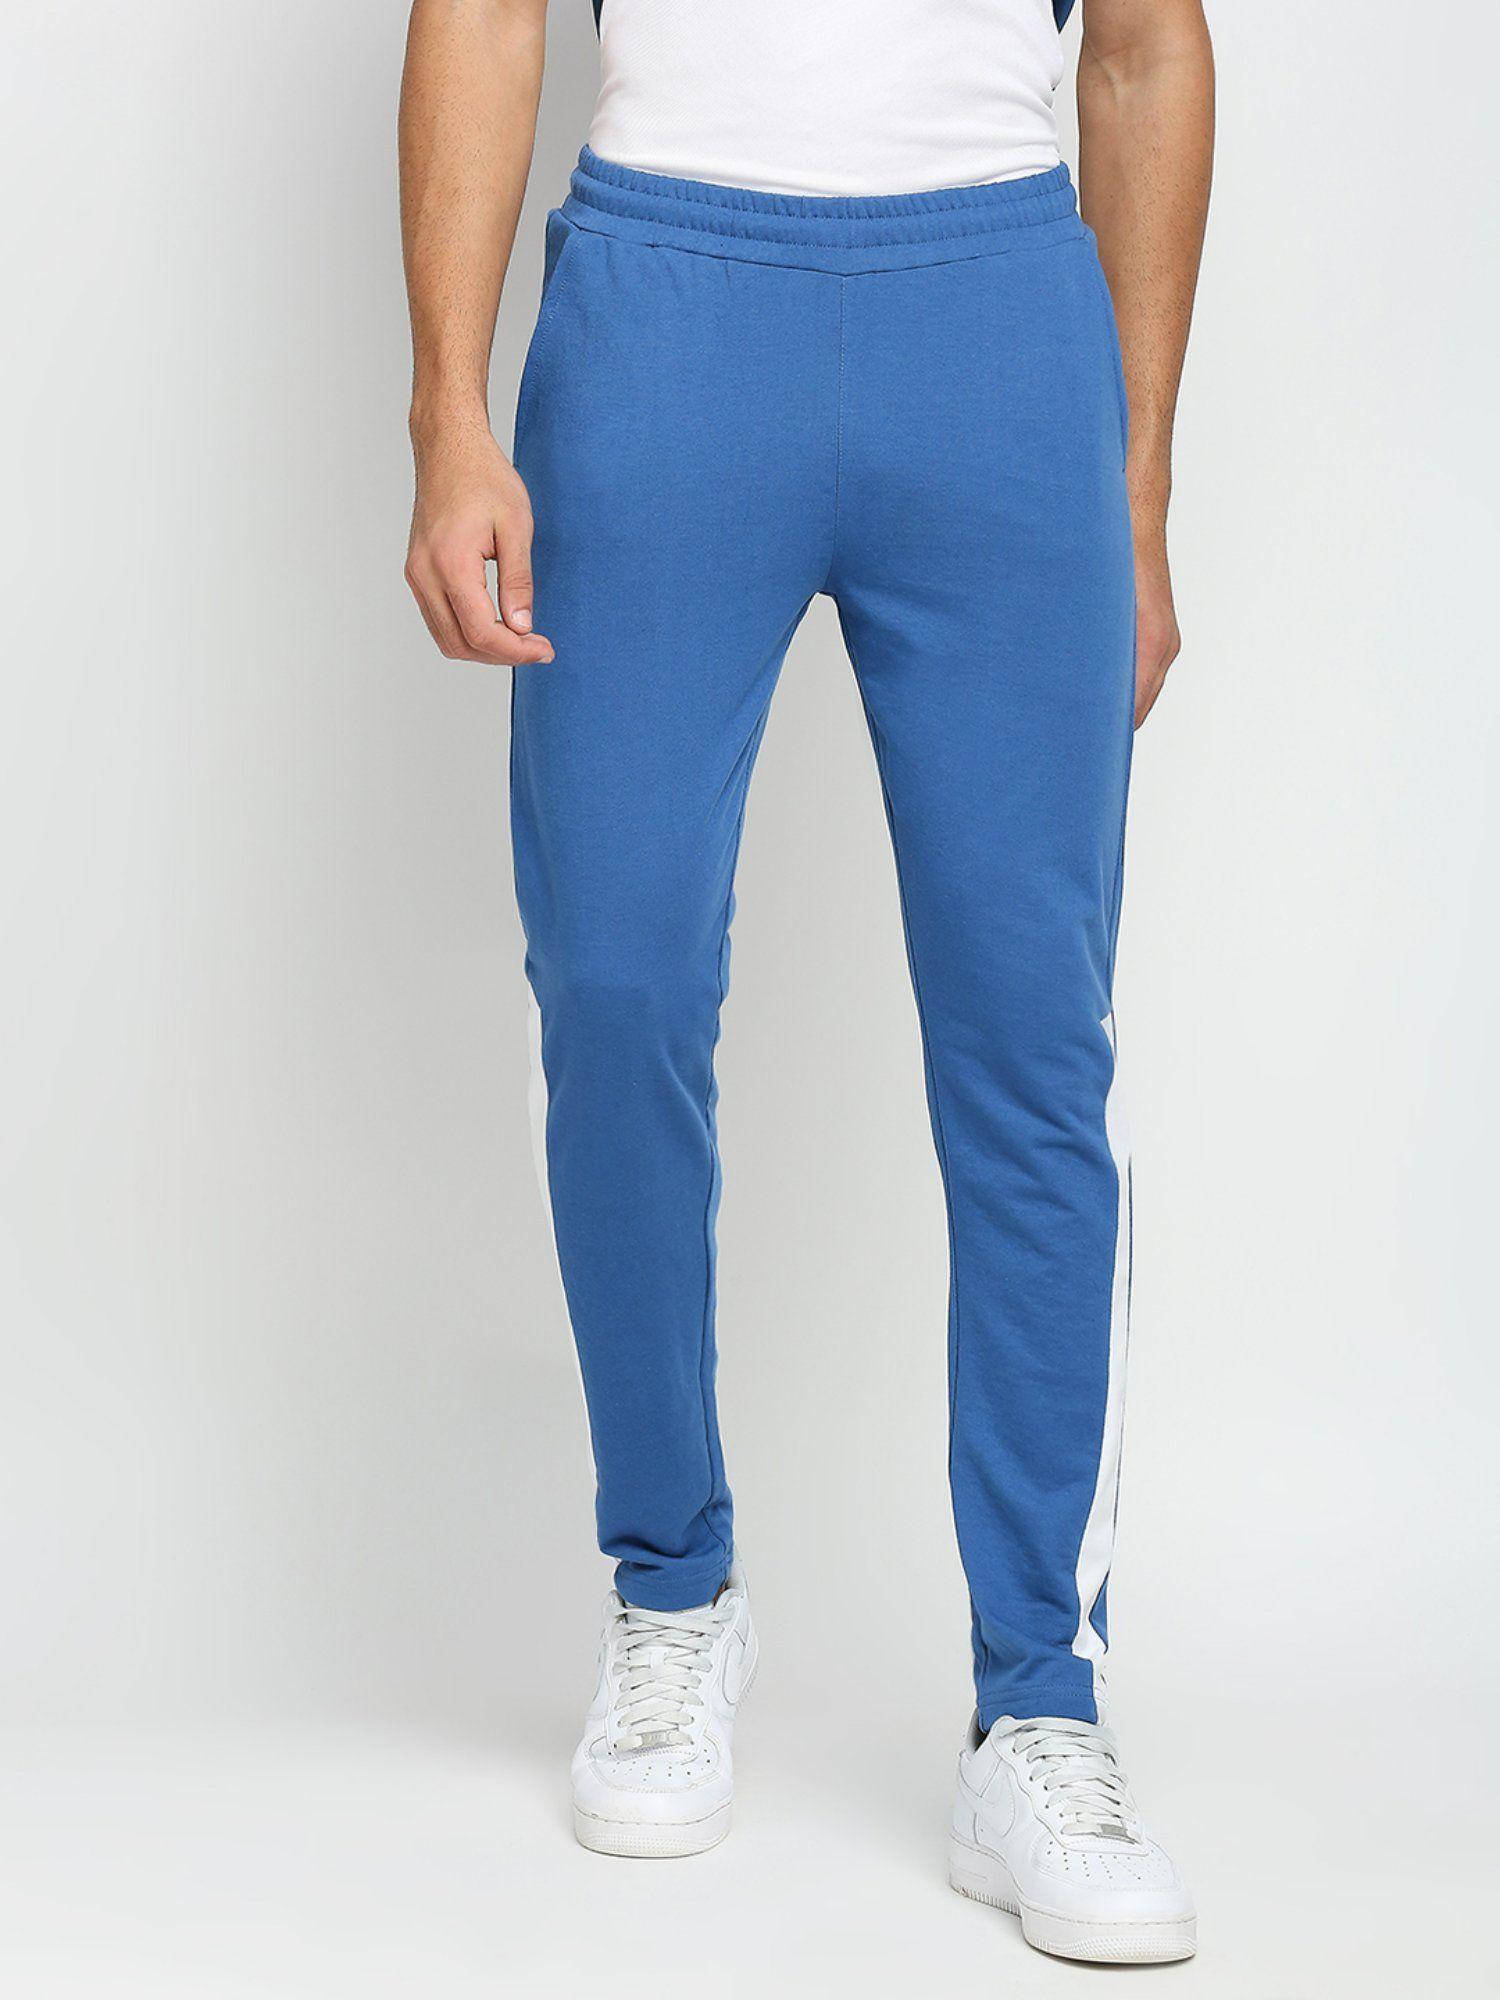 cotton polyester slim fit french terry knit joggers for mens - blue